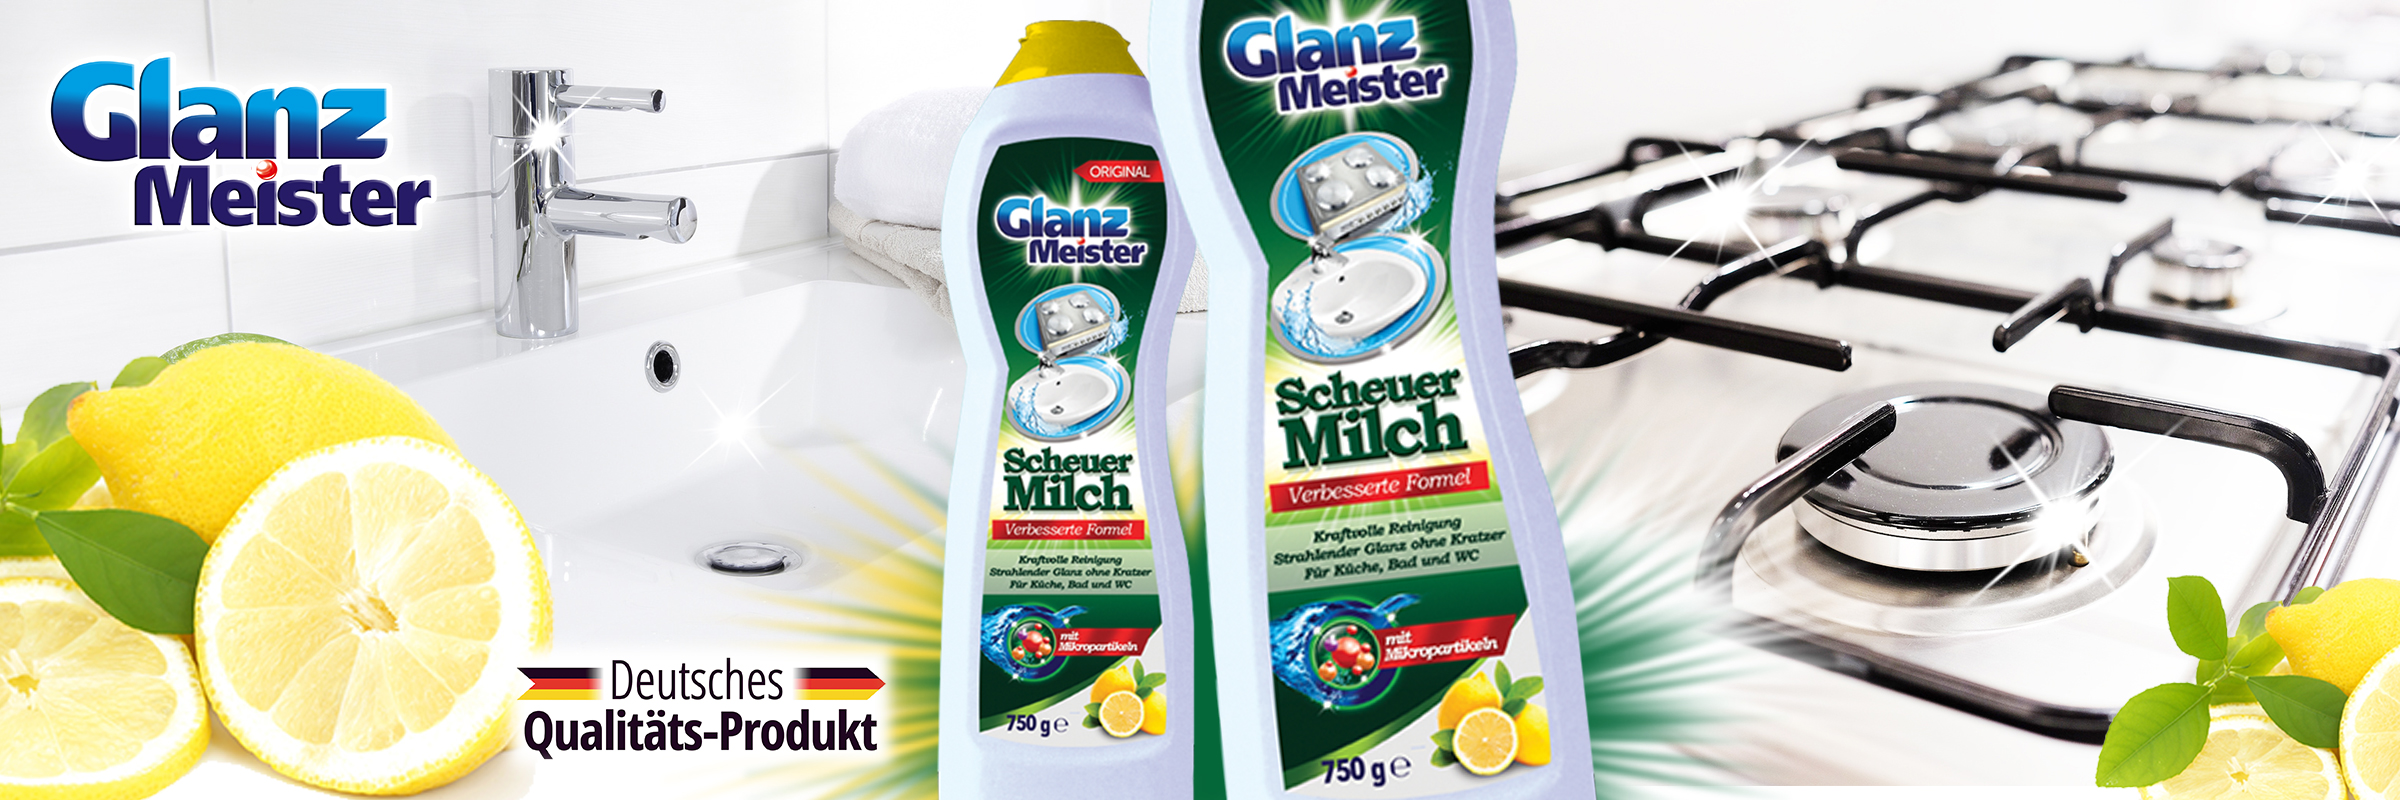 New on offer - GlanzMeister cleaning milk